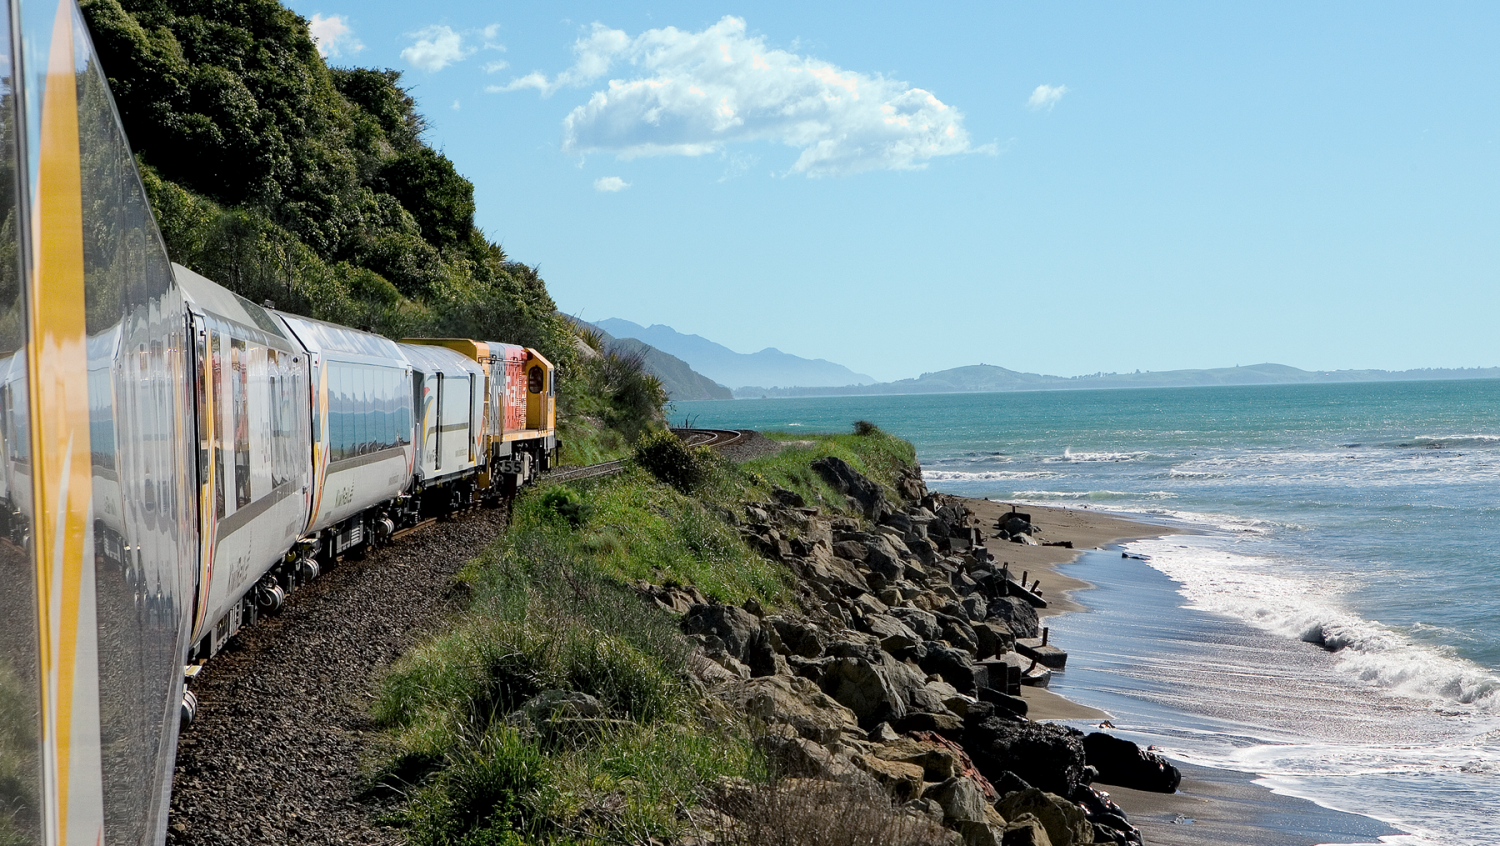 Image 1 for Embark on an Unforgettable Expedition: The Coastal Pacific Rail Journey 